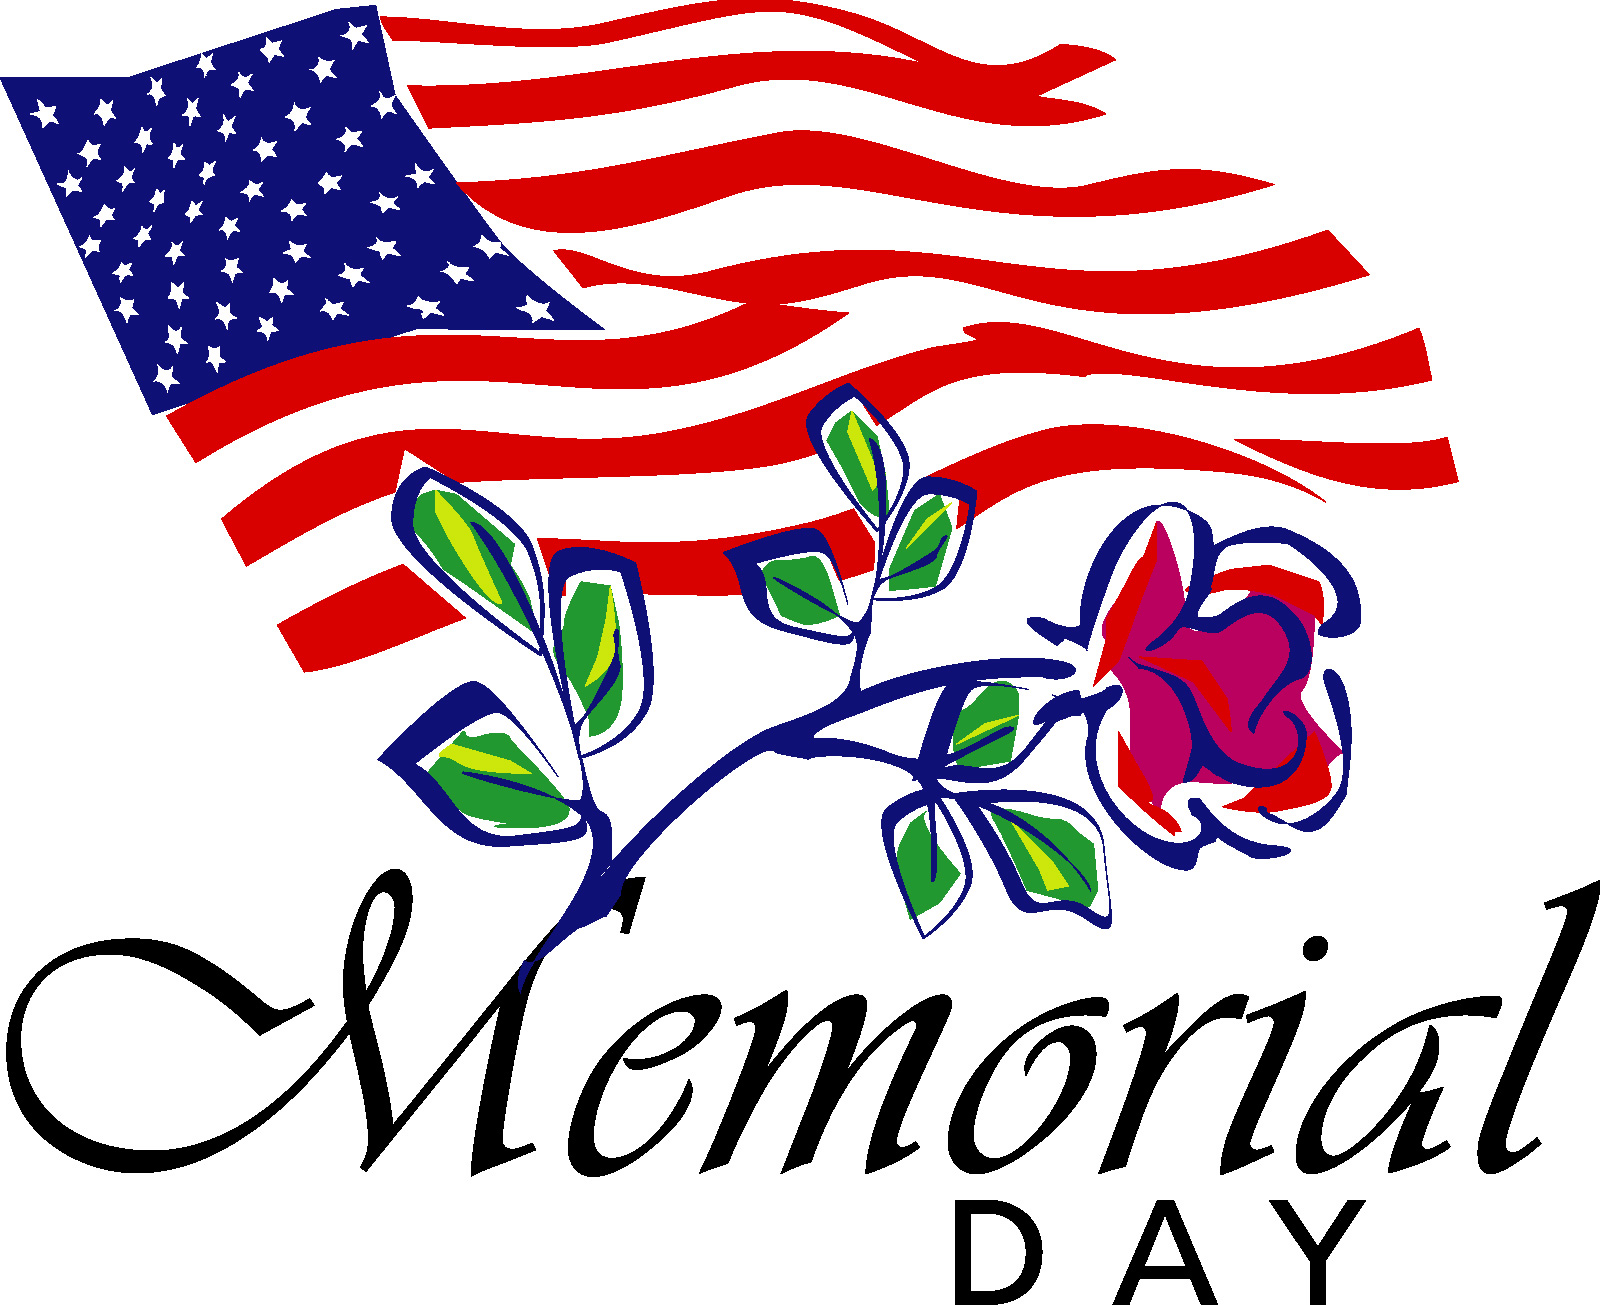 Memorial Day 2014 Wallpapers Free Download For Usa - Memorial Day Clip Art Free - HD Wallpaper 